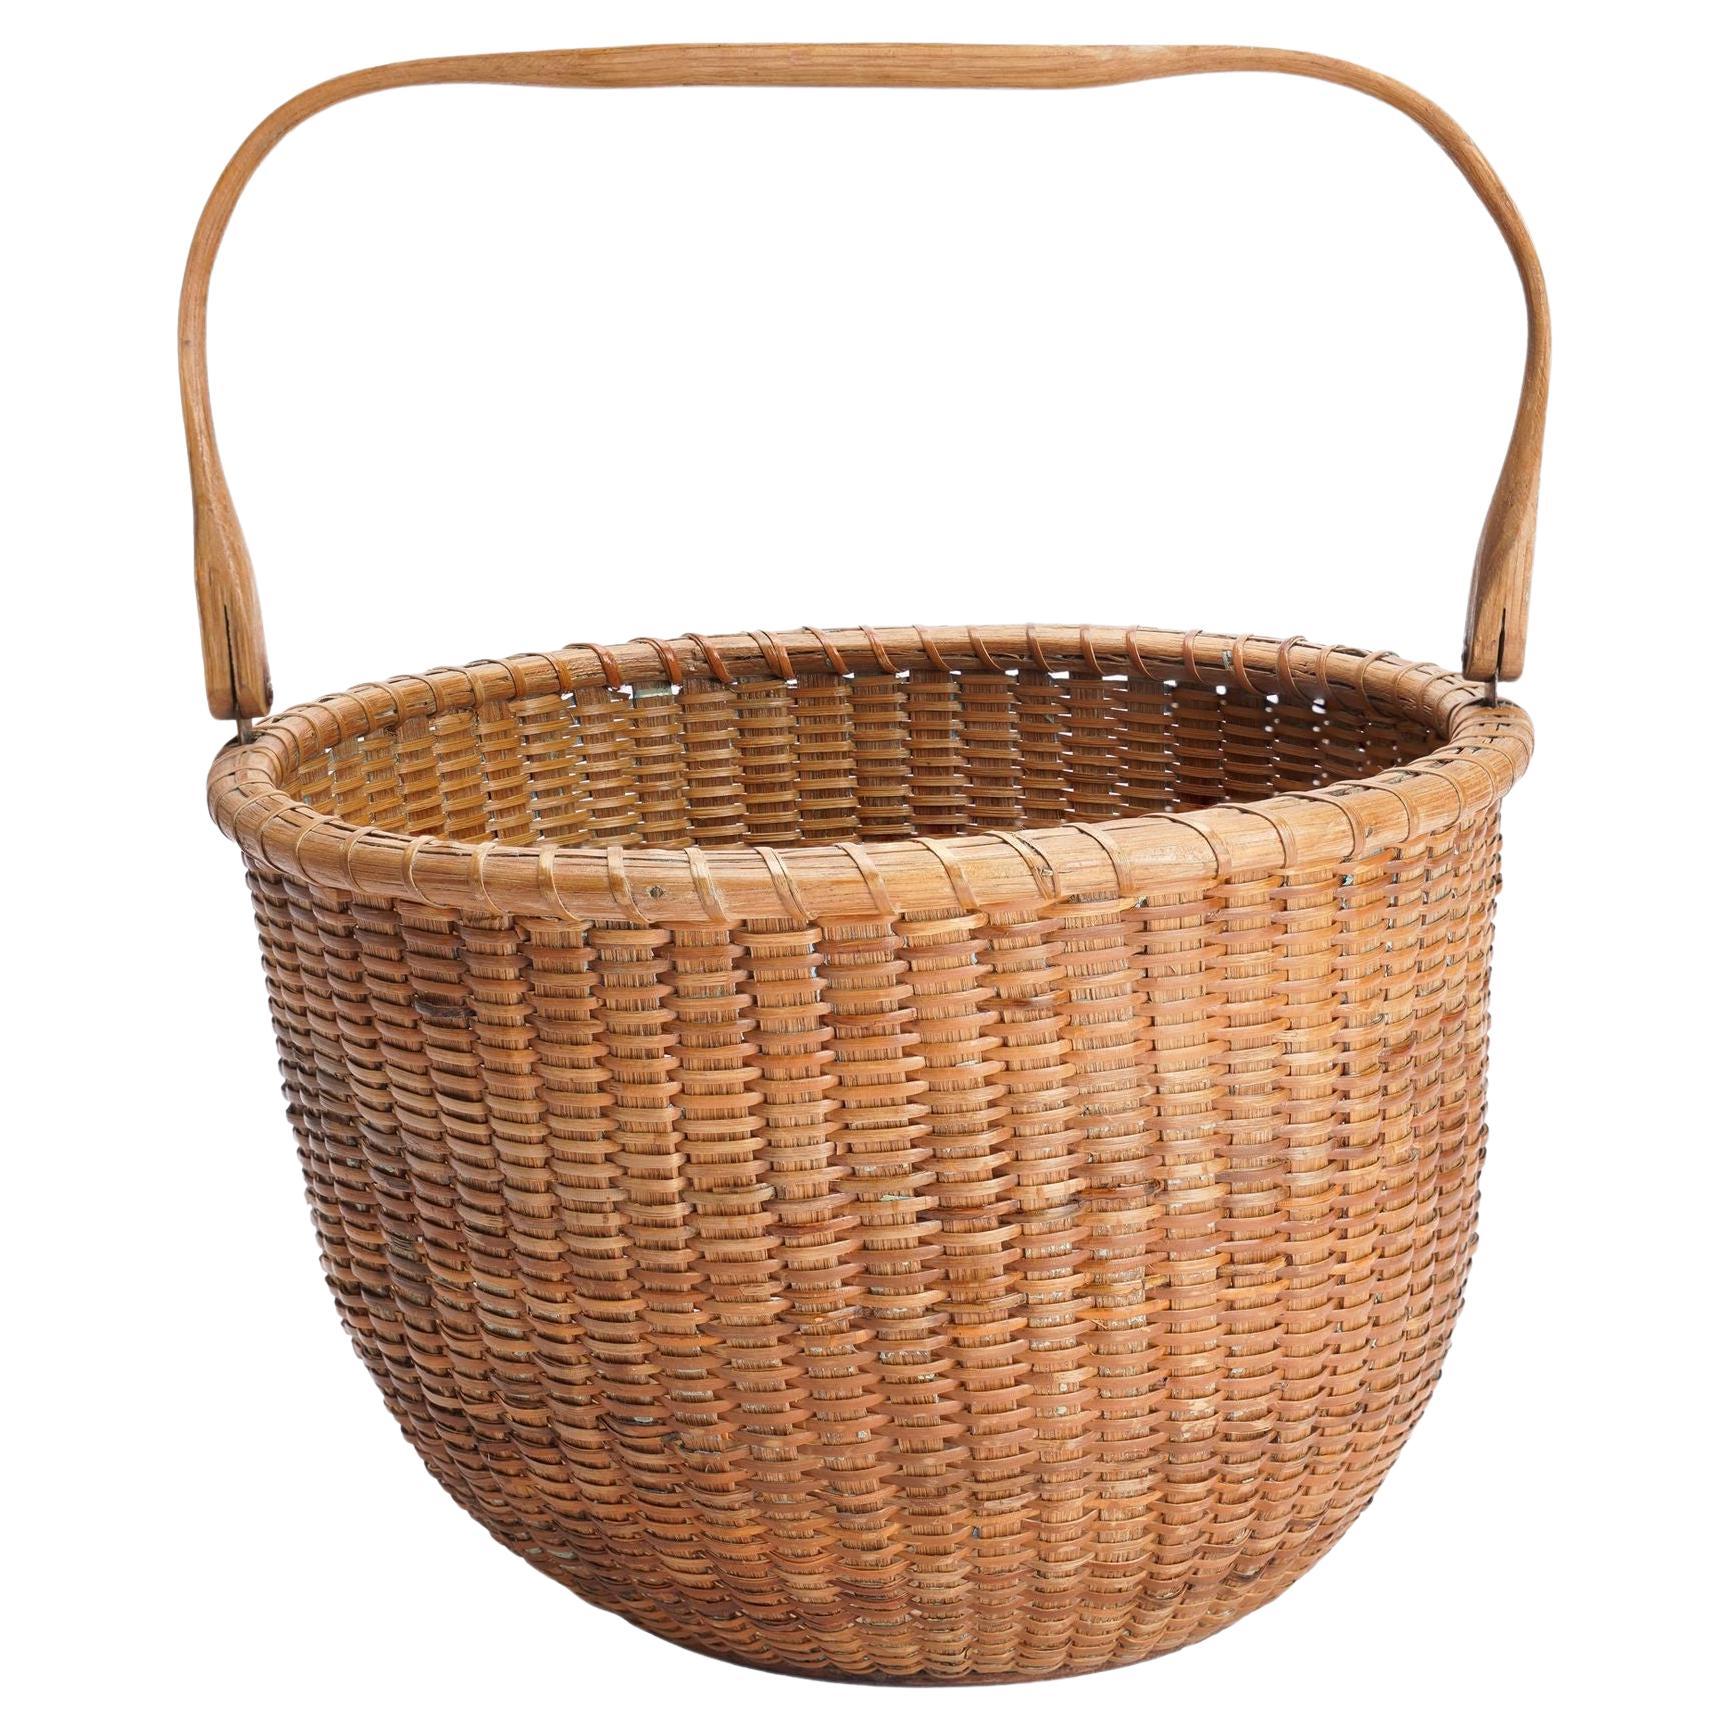 Nantucket lighthouse basket attributed to Mitchy Ray, 1900-50 For Sale